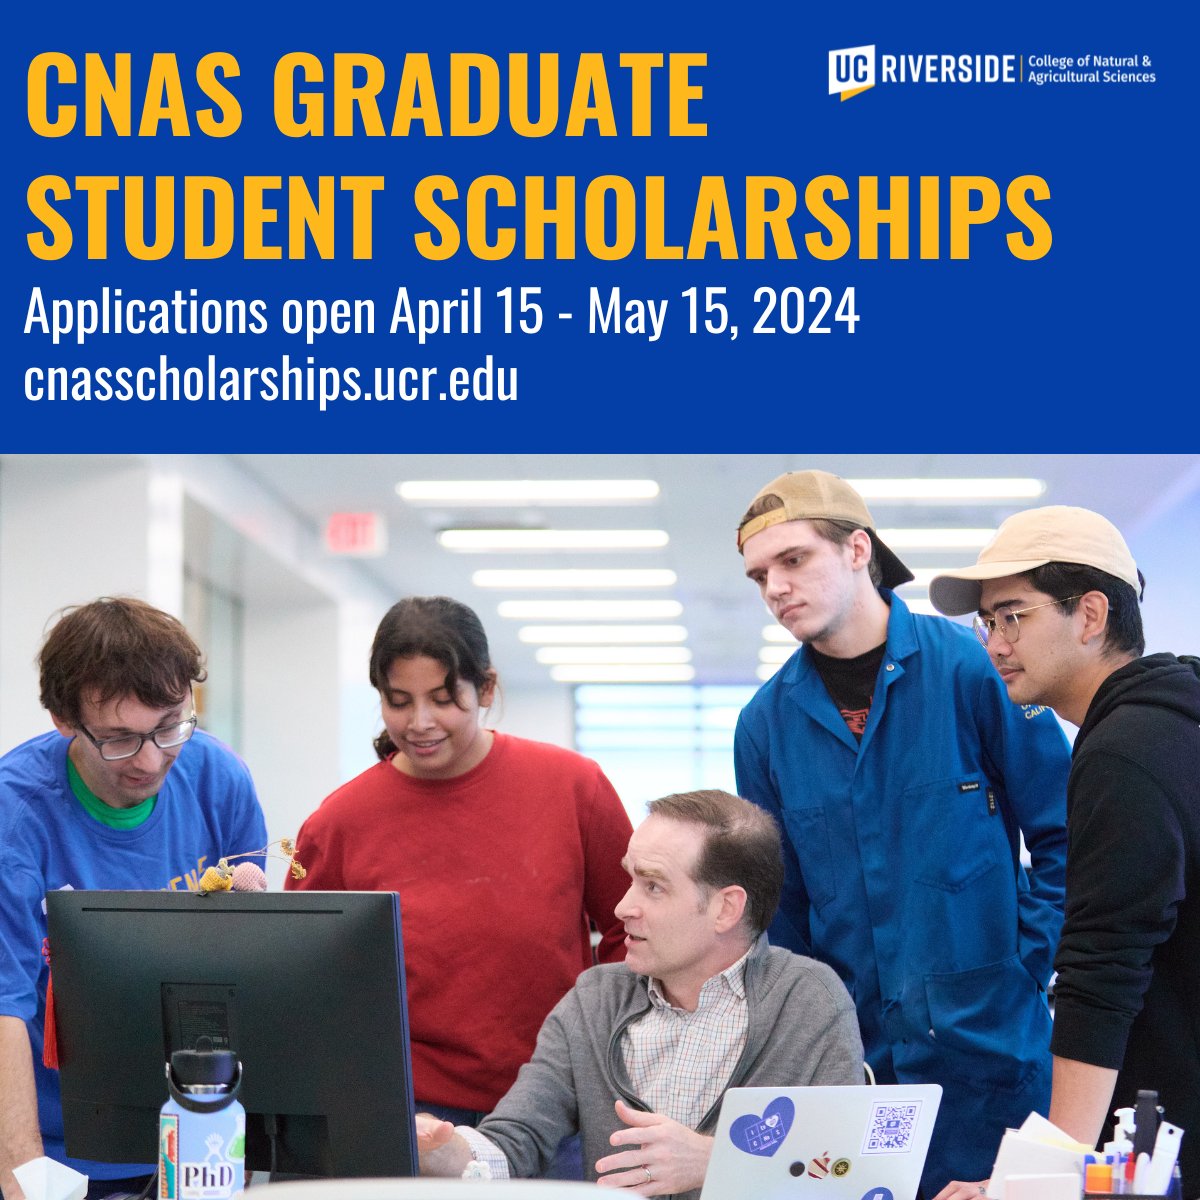 Attention CNAS Graduate Students! Applications are still open for the CNAS Graduate Student Scholarships. Don't miss out on this opportunity! Apply by May 15, 2024. Visit cnasscholarships.ucr.edu to learn more and apply! #UCRCNAS #graduatestudents #scholarships #ucriverside #ucr